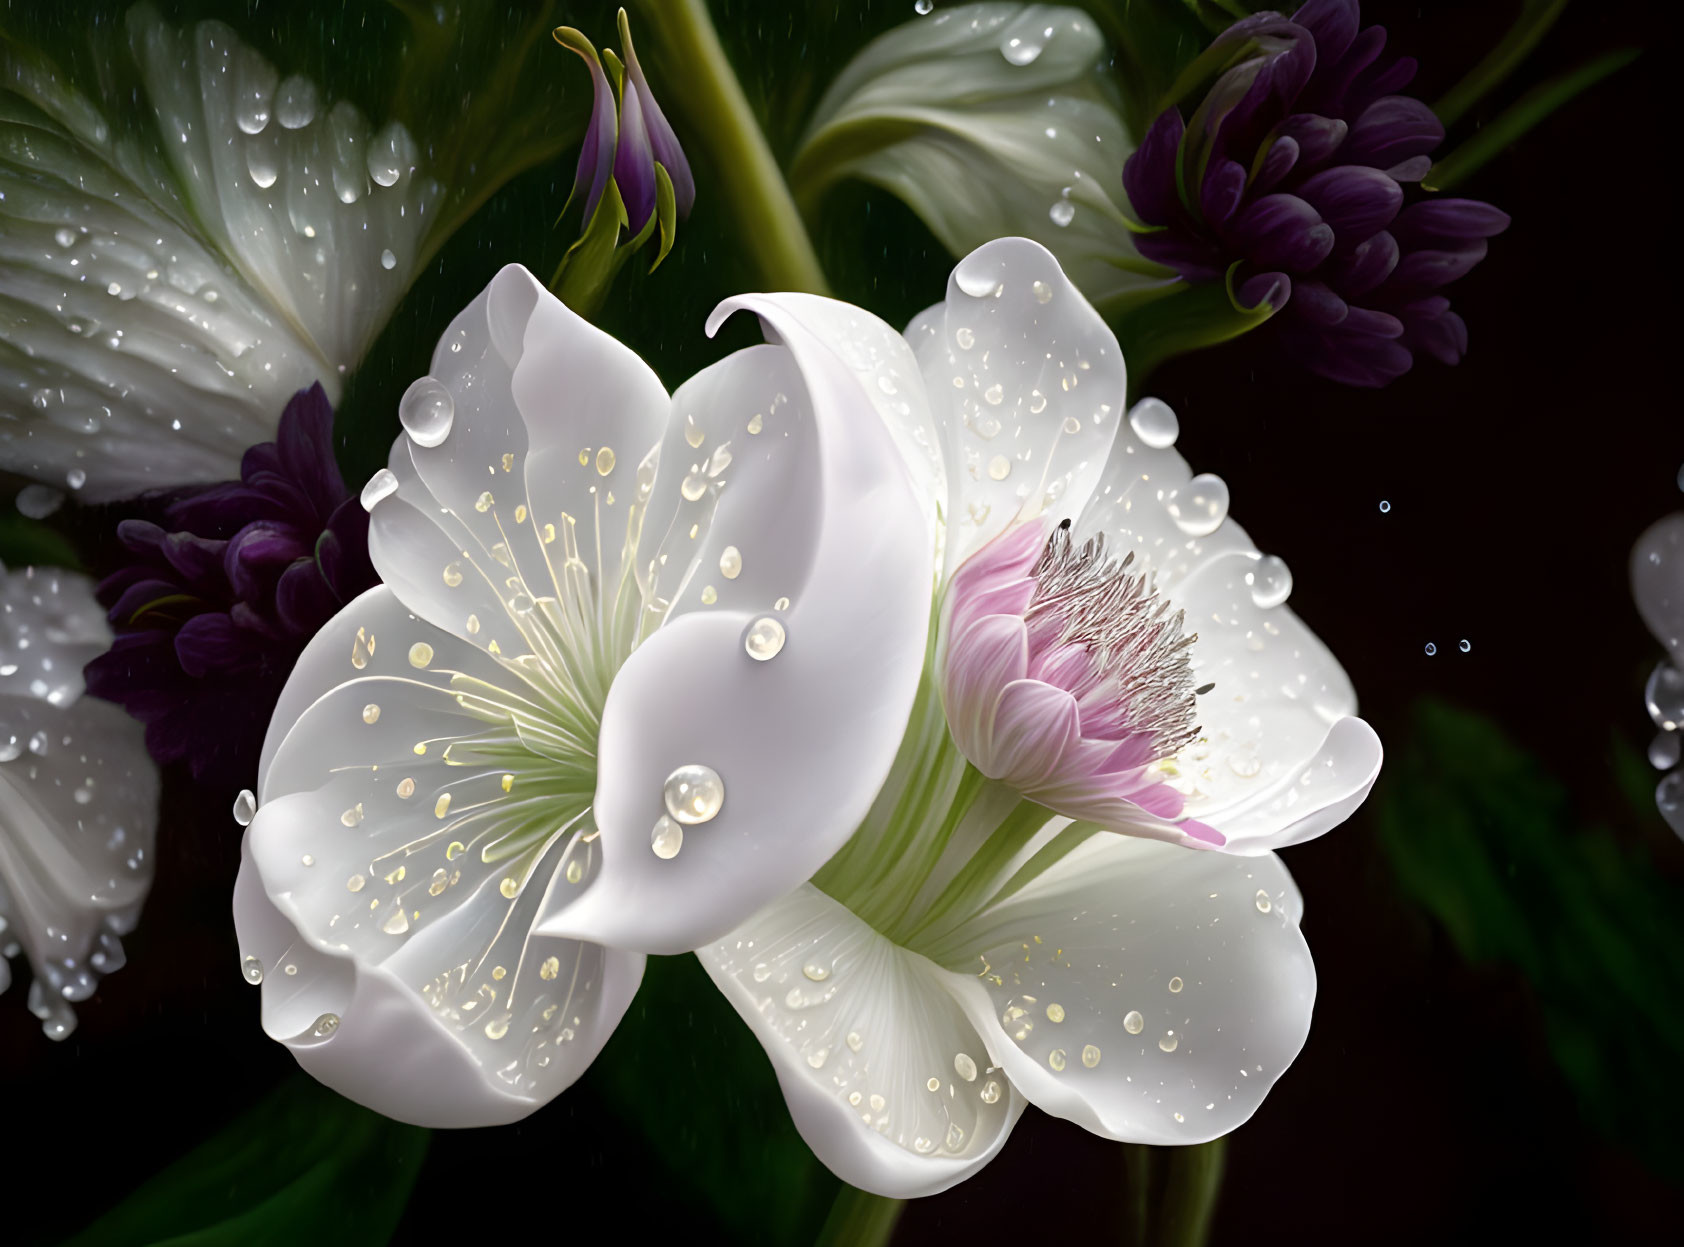 White Blossoms with Dewdrops Surrounded by Lush Greenery and Purple Flowers